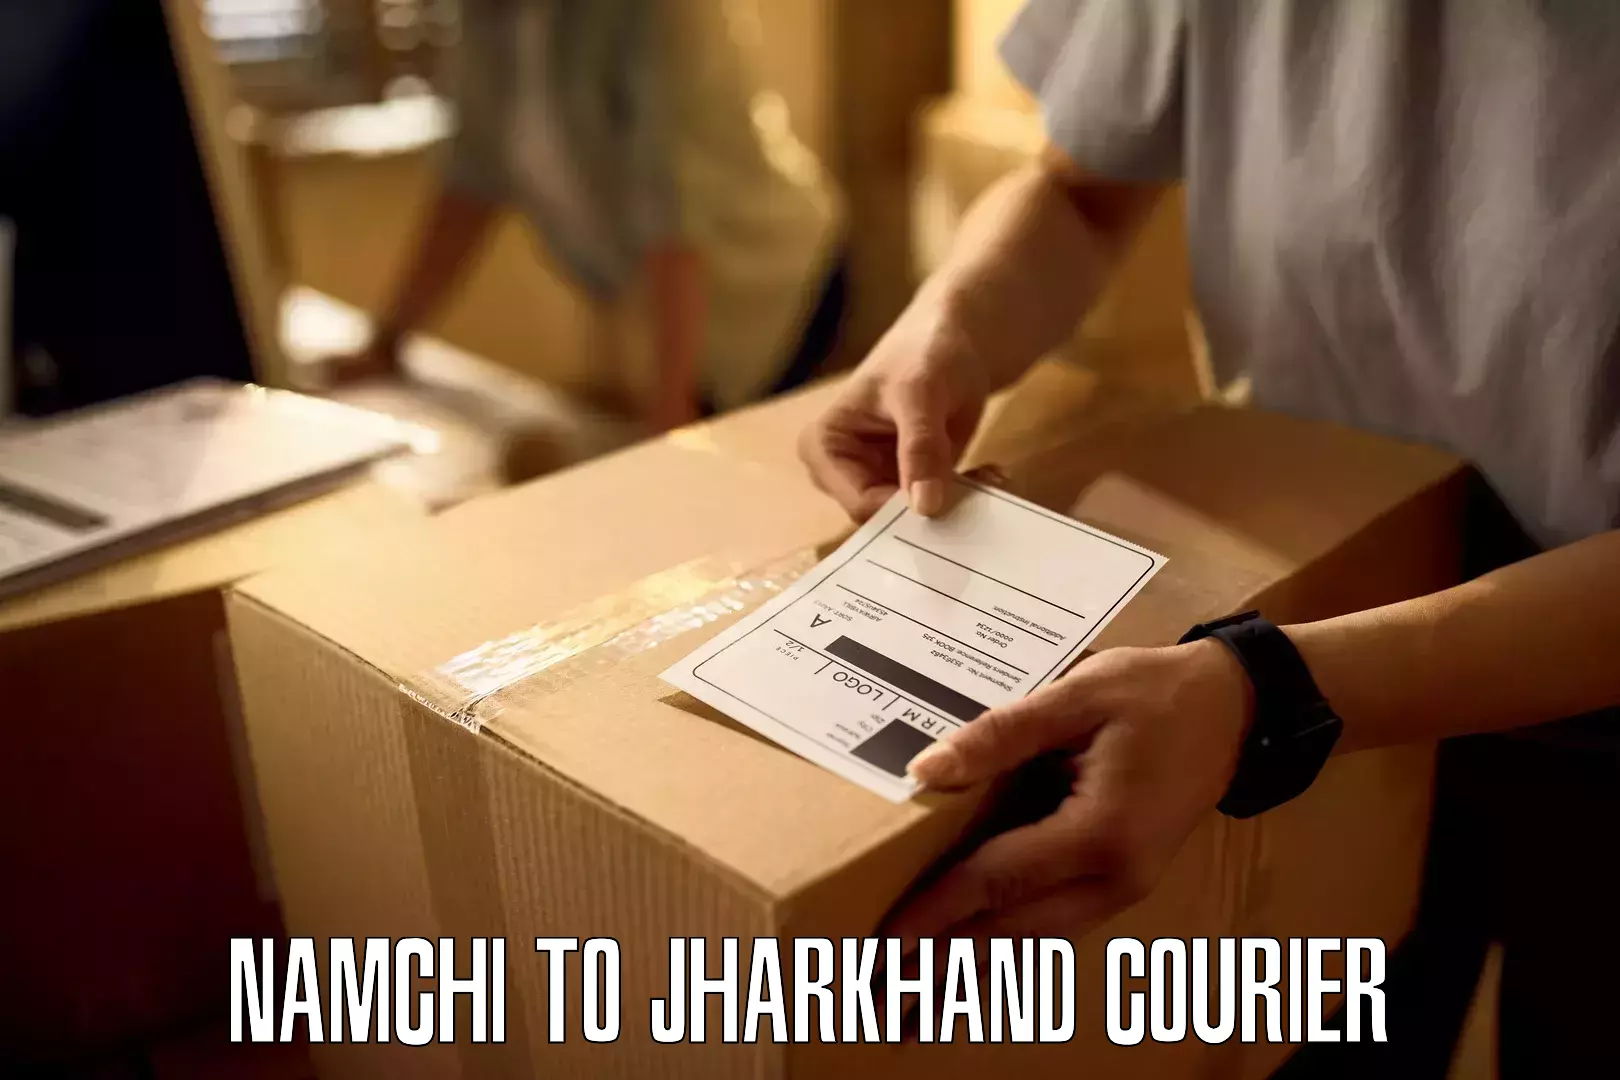 Urban courier service Namchi to Jharkhand